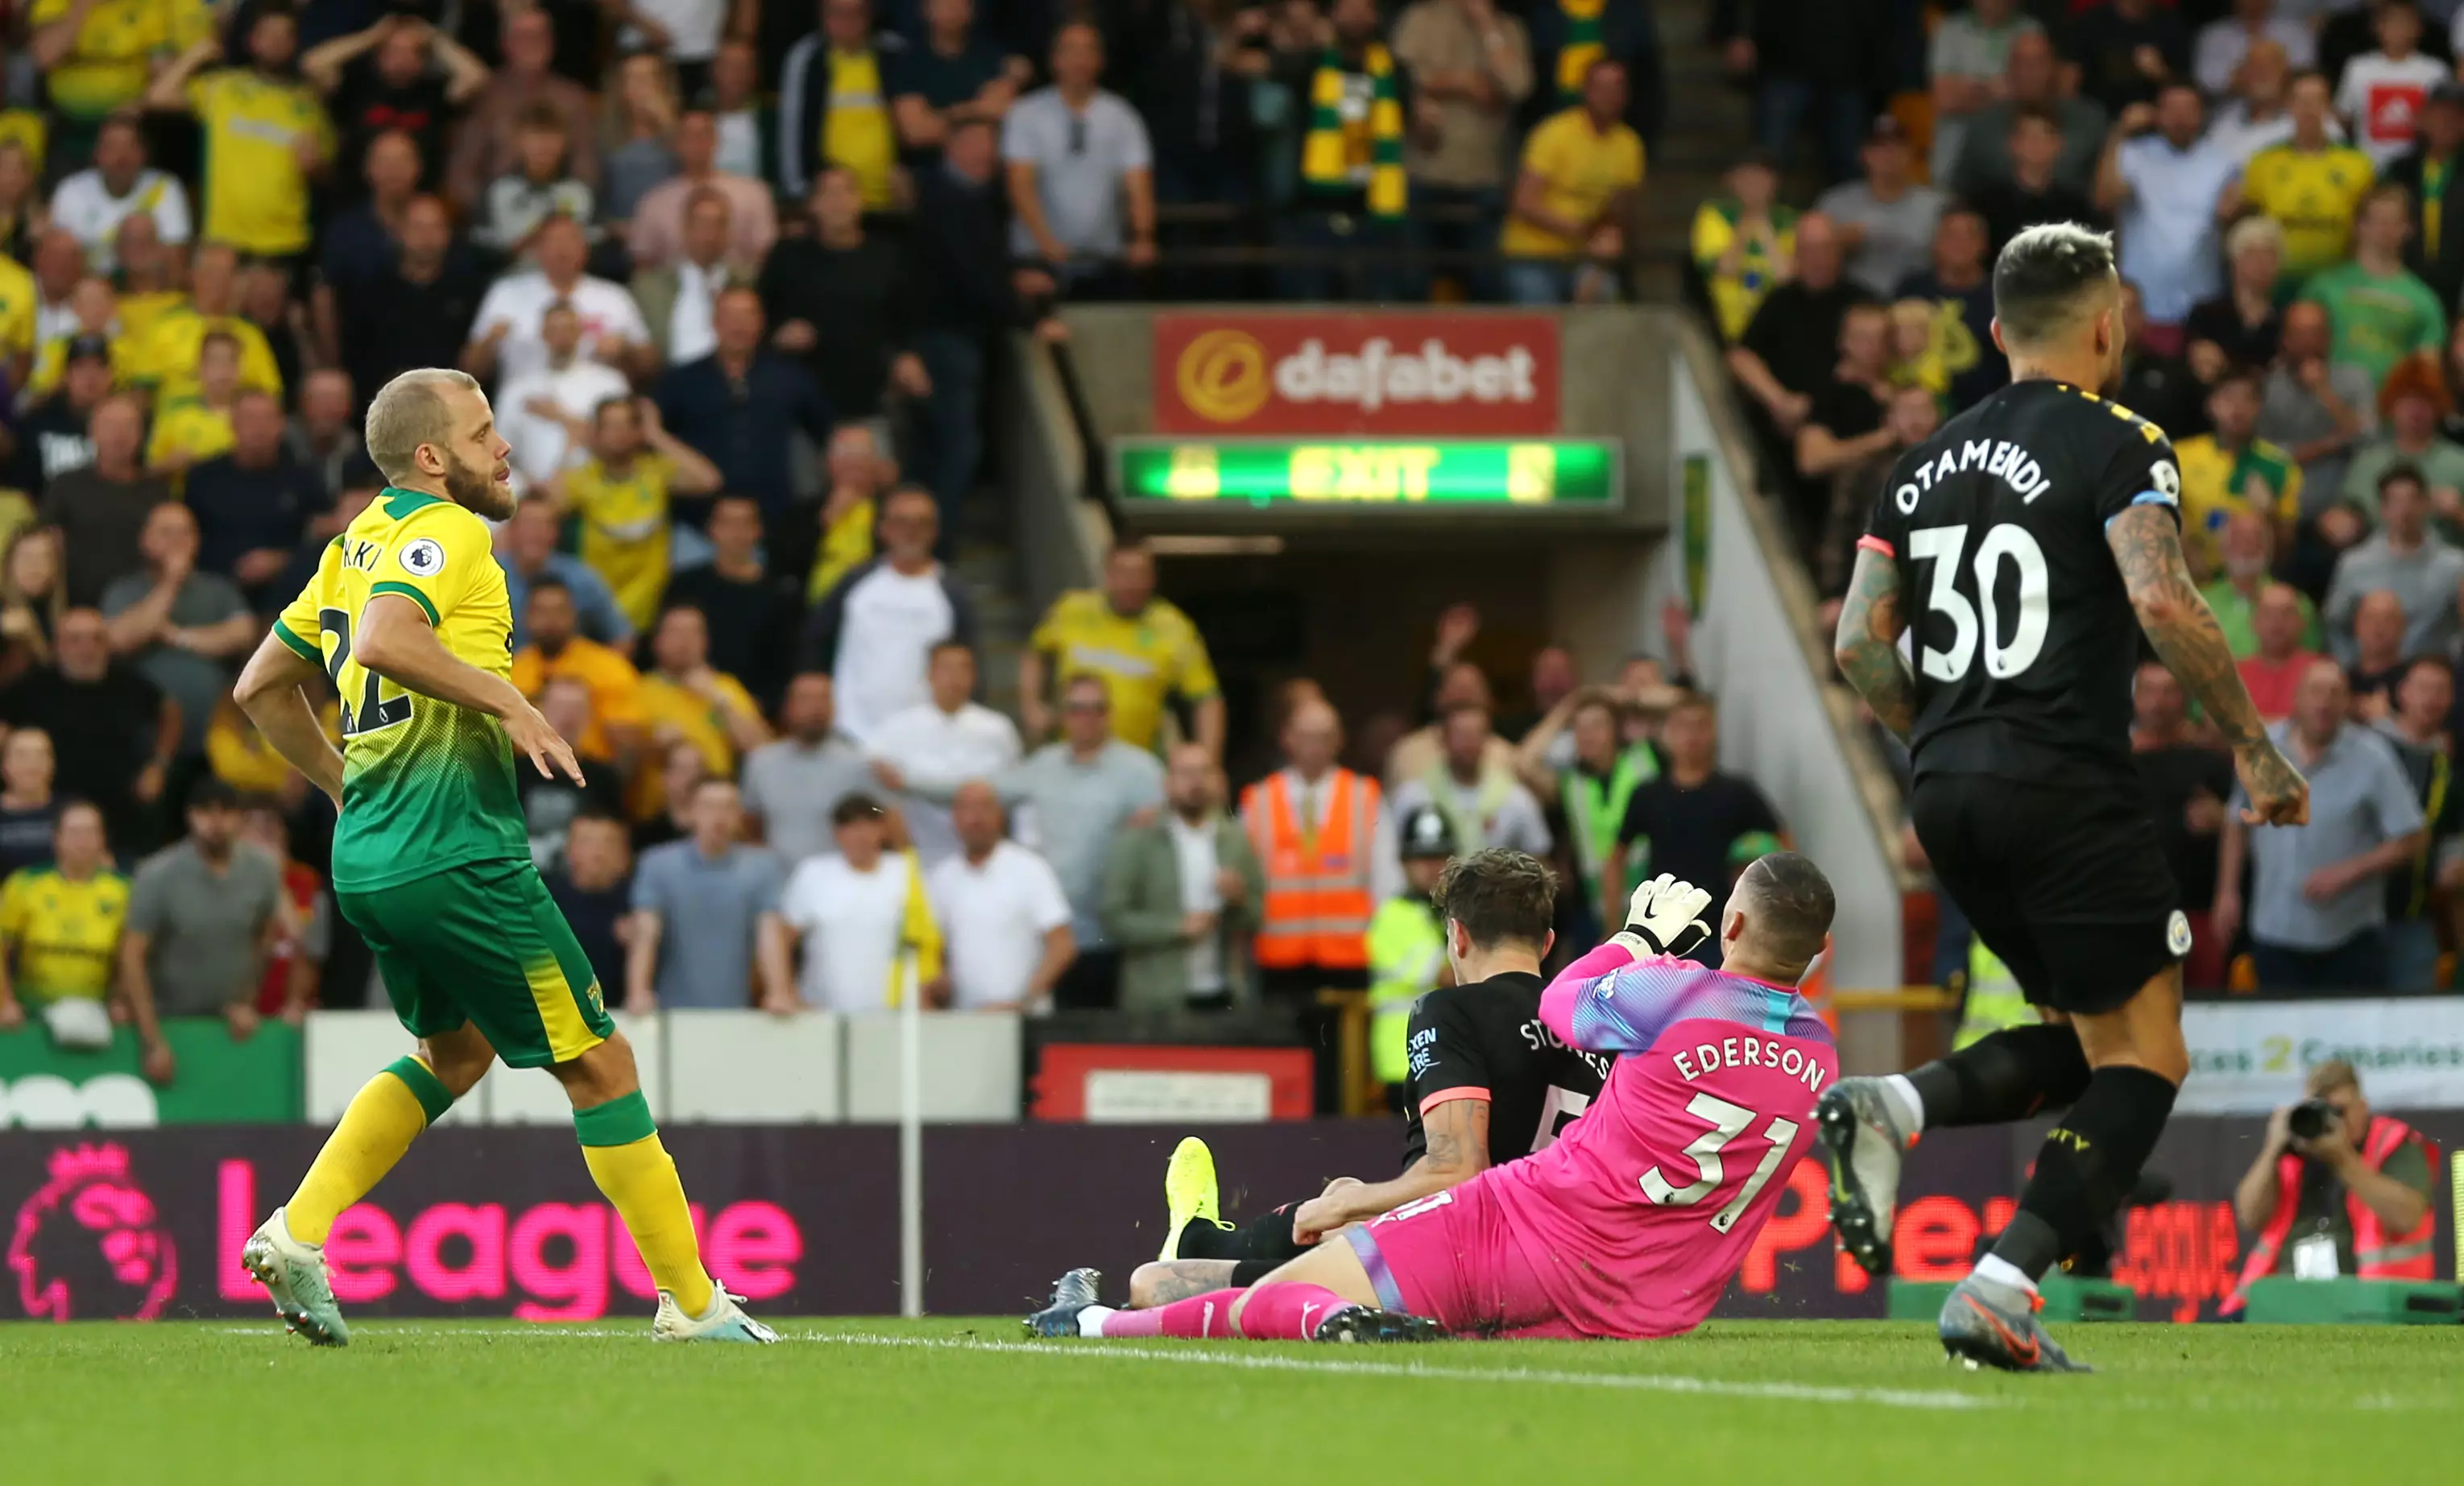 Teemu Pukki scores Norwich's third goal in their victory over Man City at Carrow Road